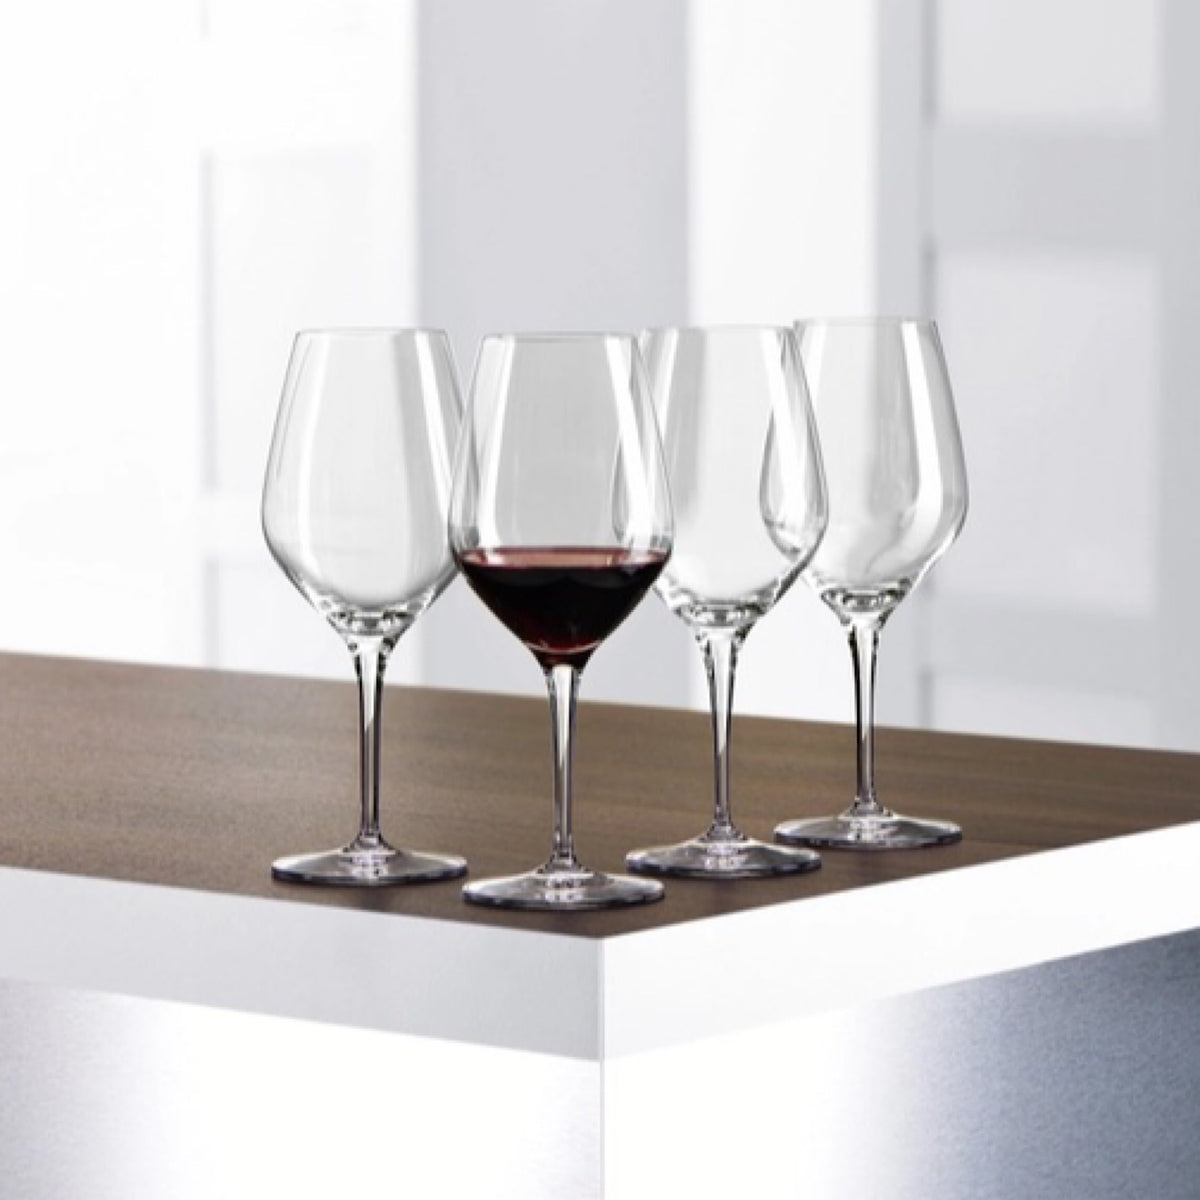 Authentis Red Wine Glasses, Set of 4